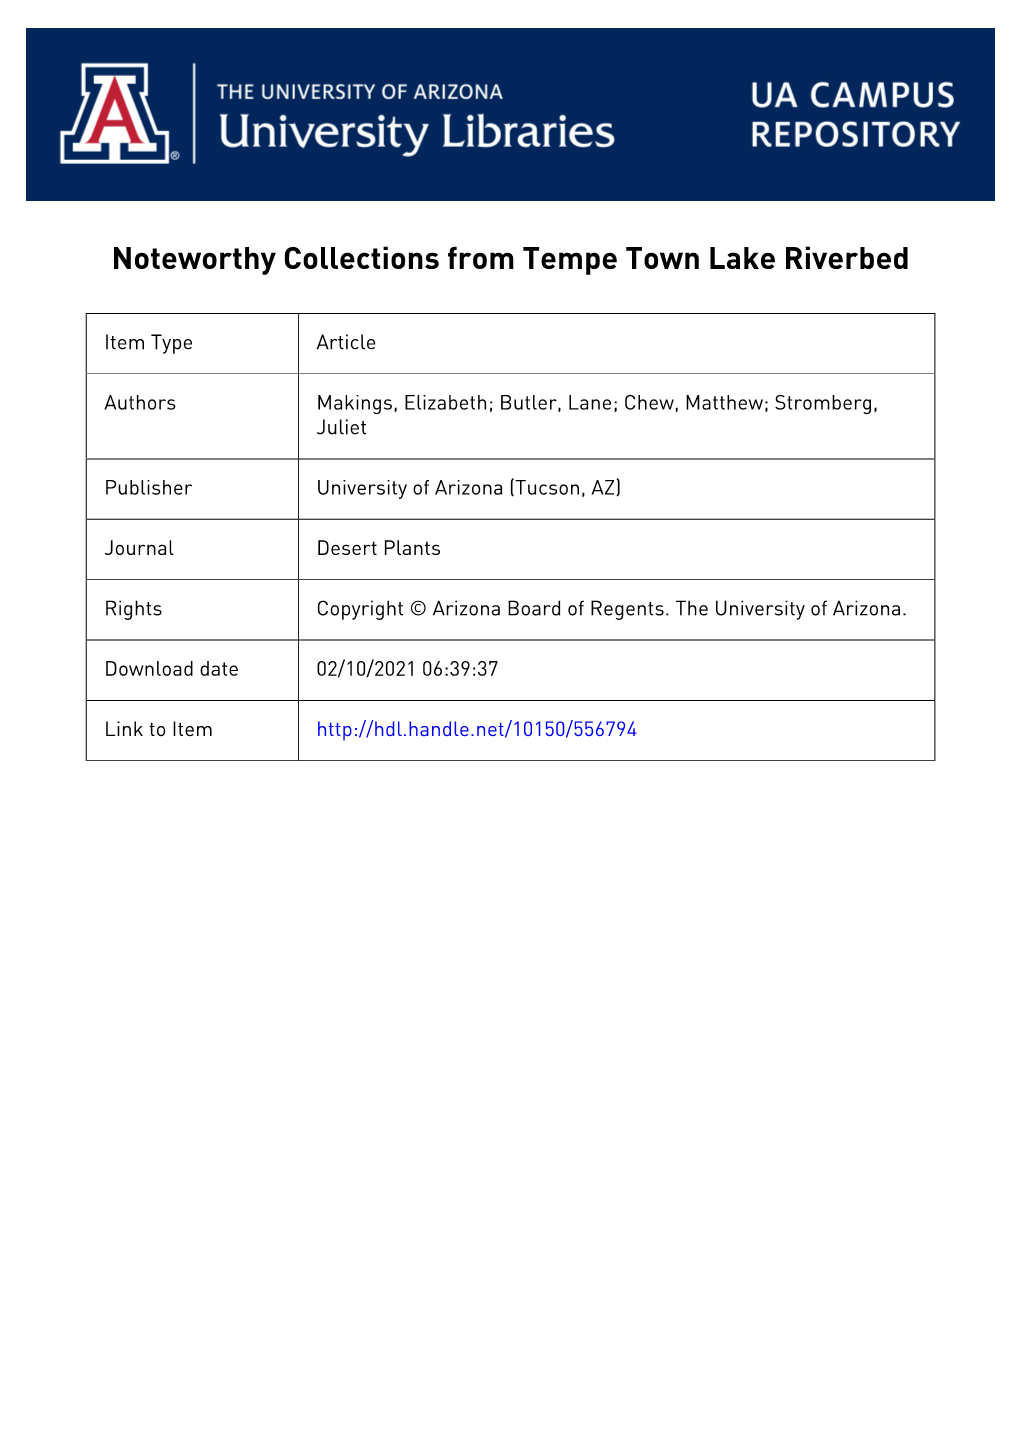 Noteworthy Collections from Tempe Towne Lake Riverbed